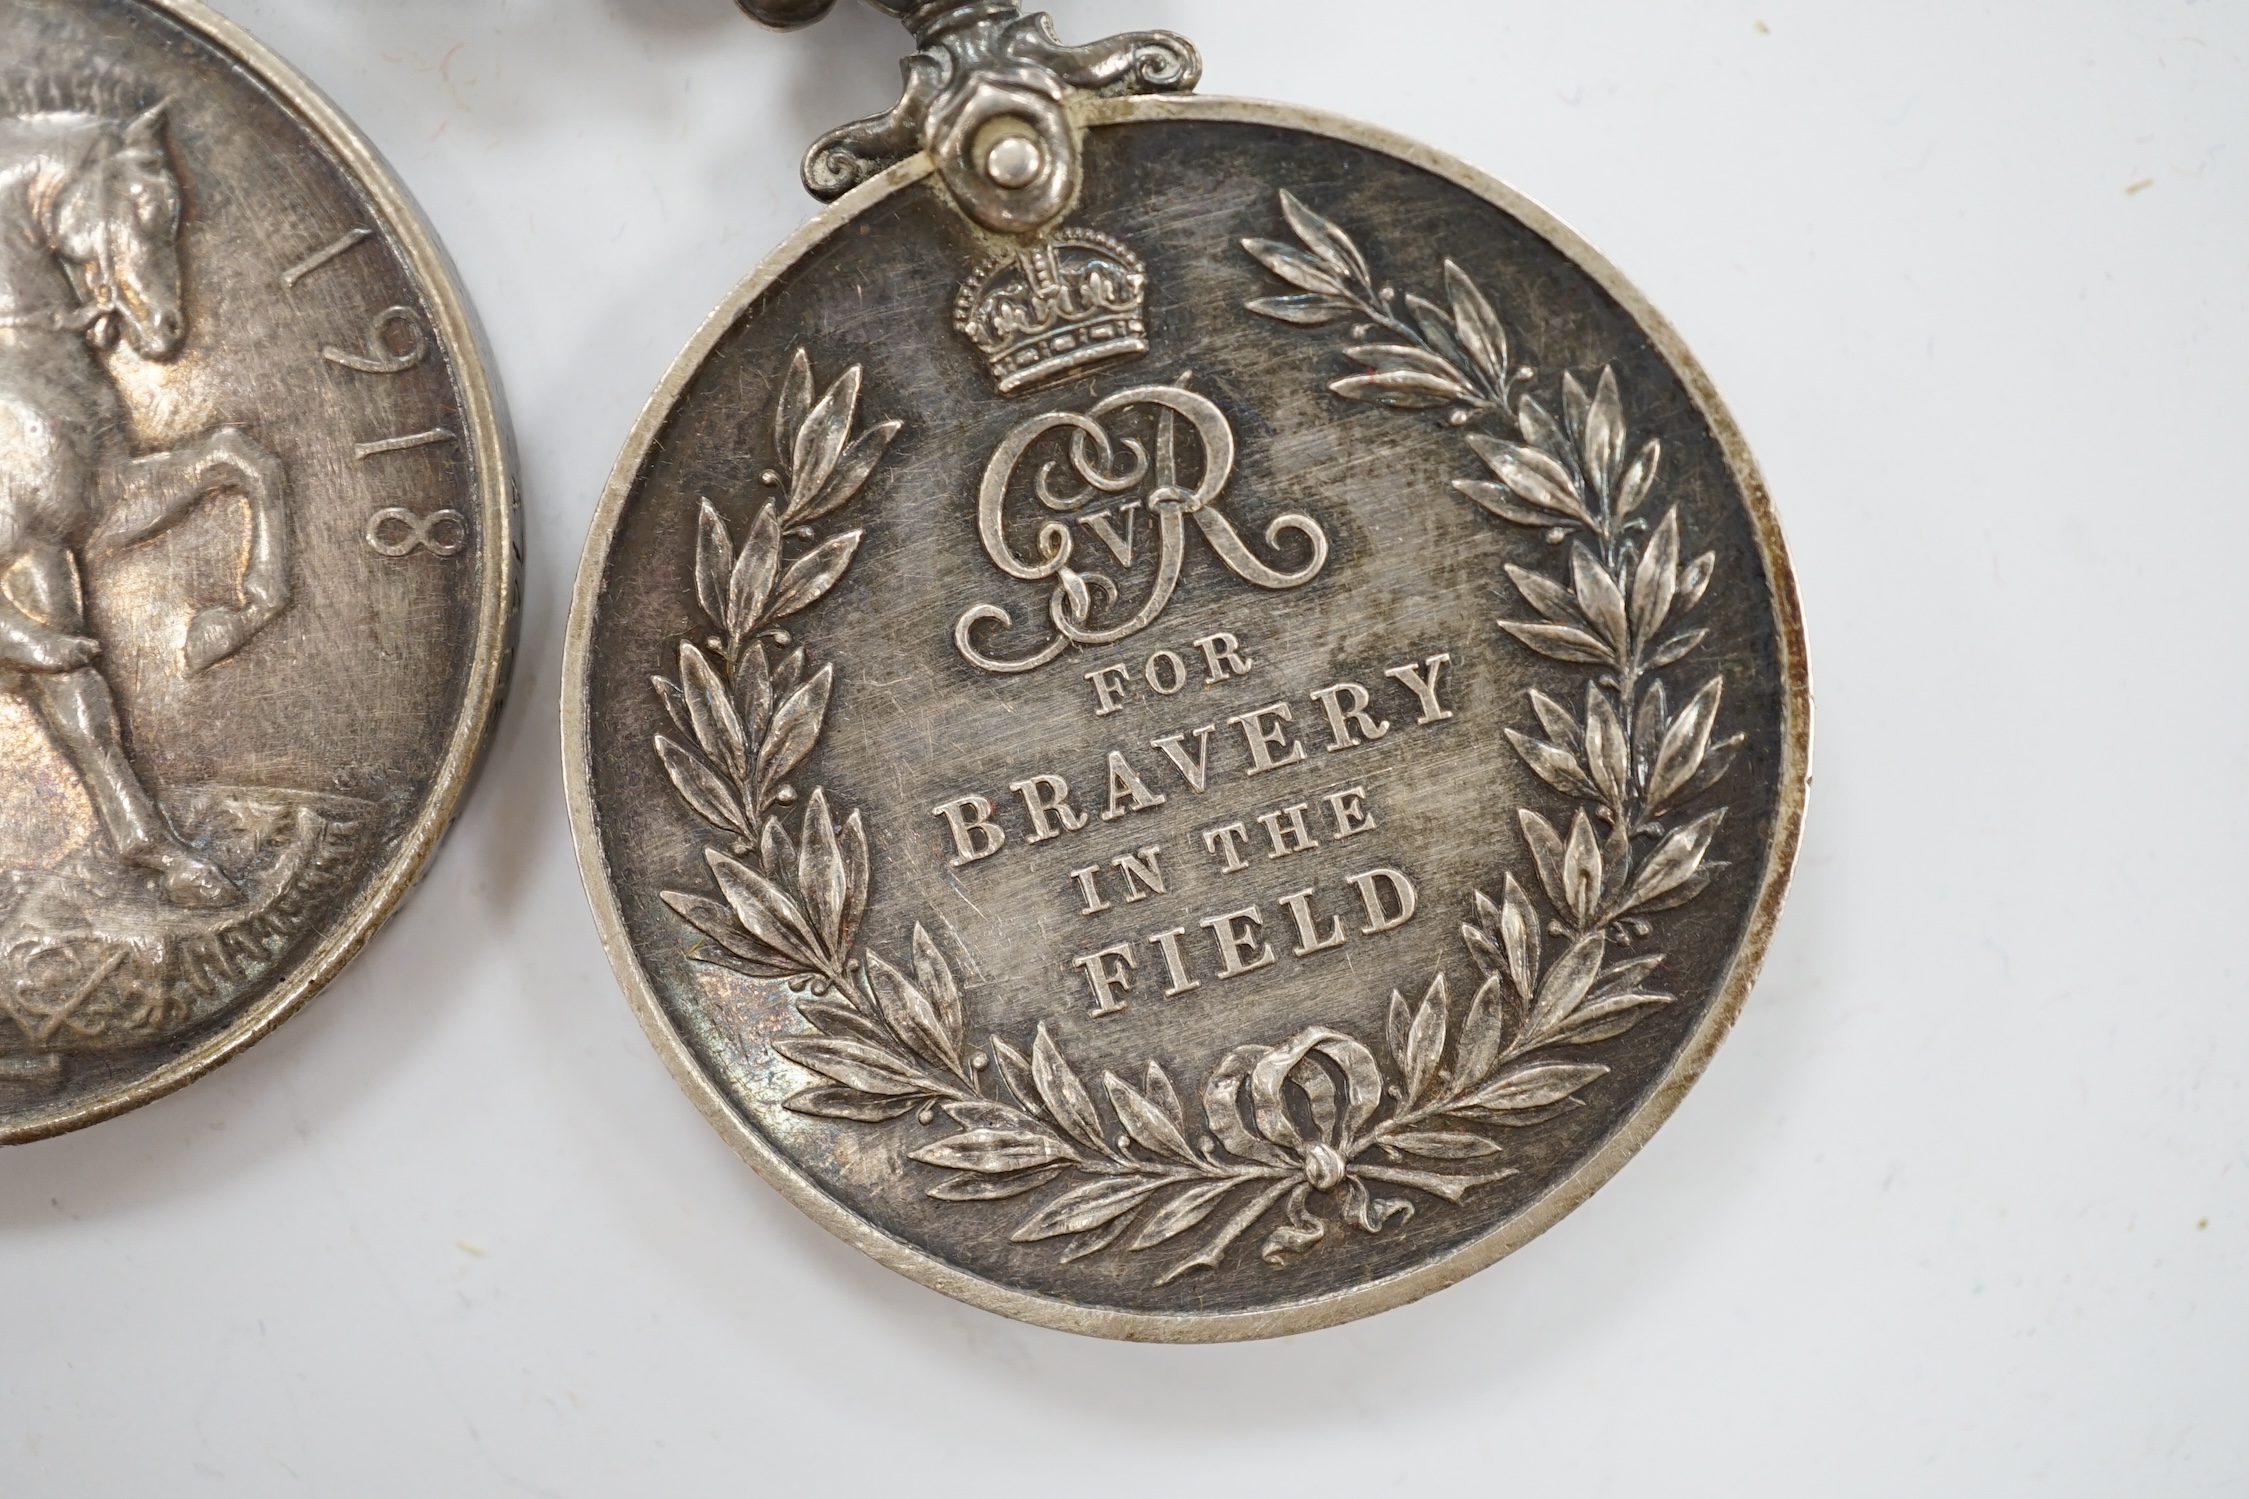 Two First World War medal groups; a military medal group awarded to Pte. H.S. Cribb, 23rd Northumberland Fusiliers, comprising; the Military Medal for Bravery in the Field, the Special Constabulary Medal, the War Medal a